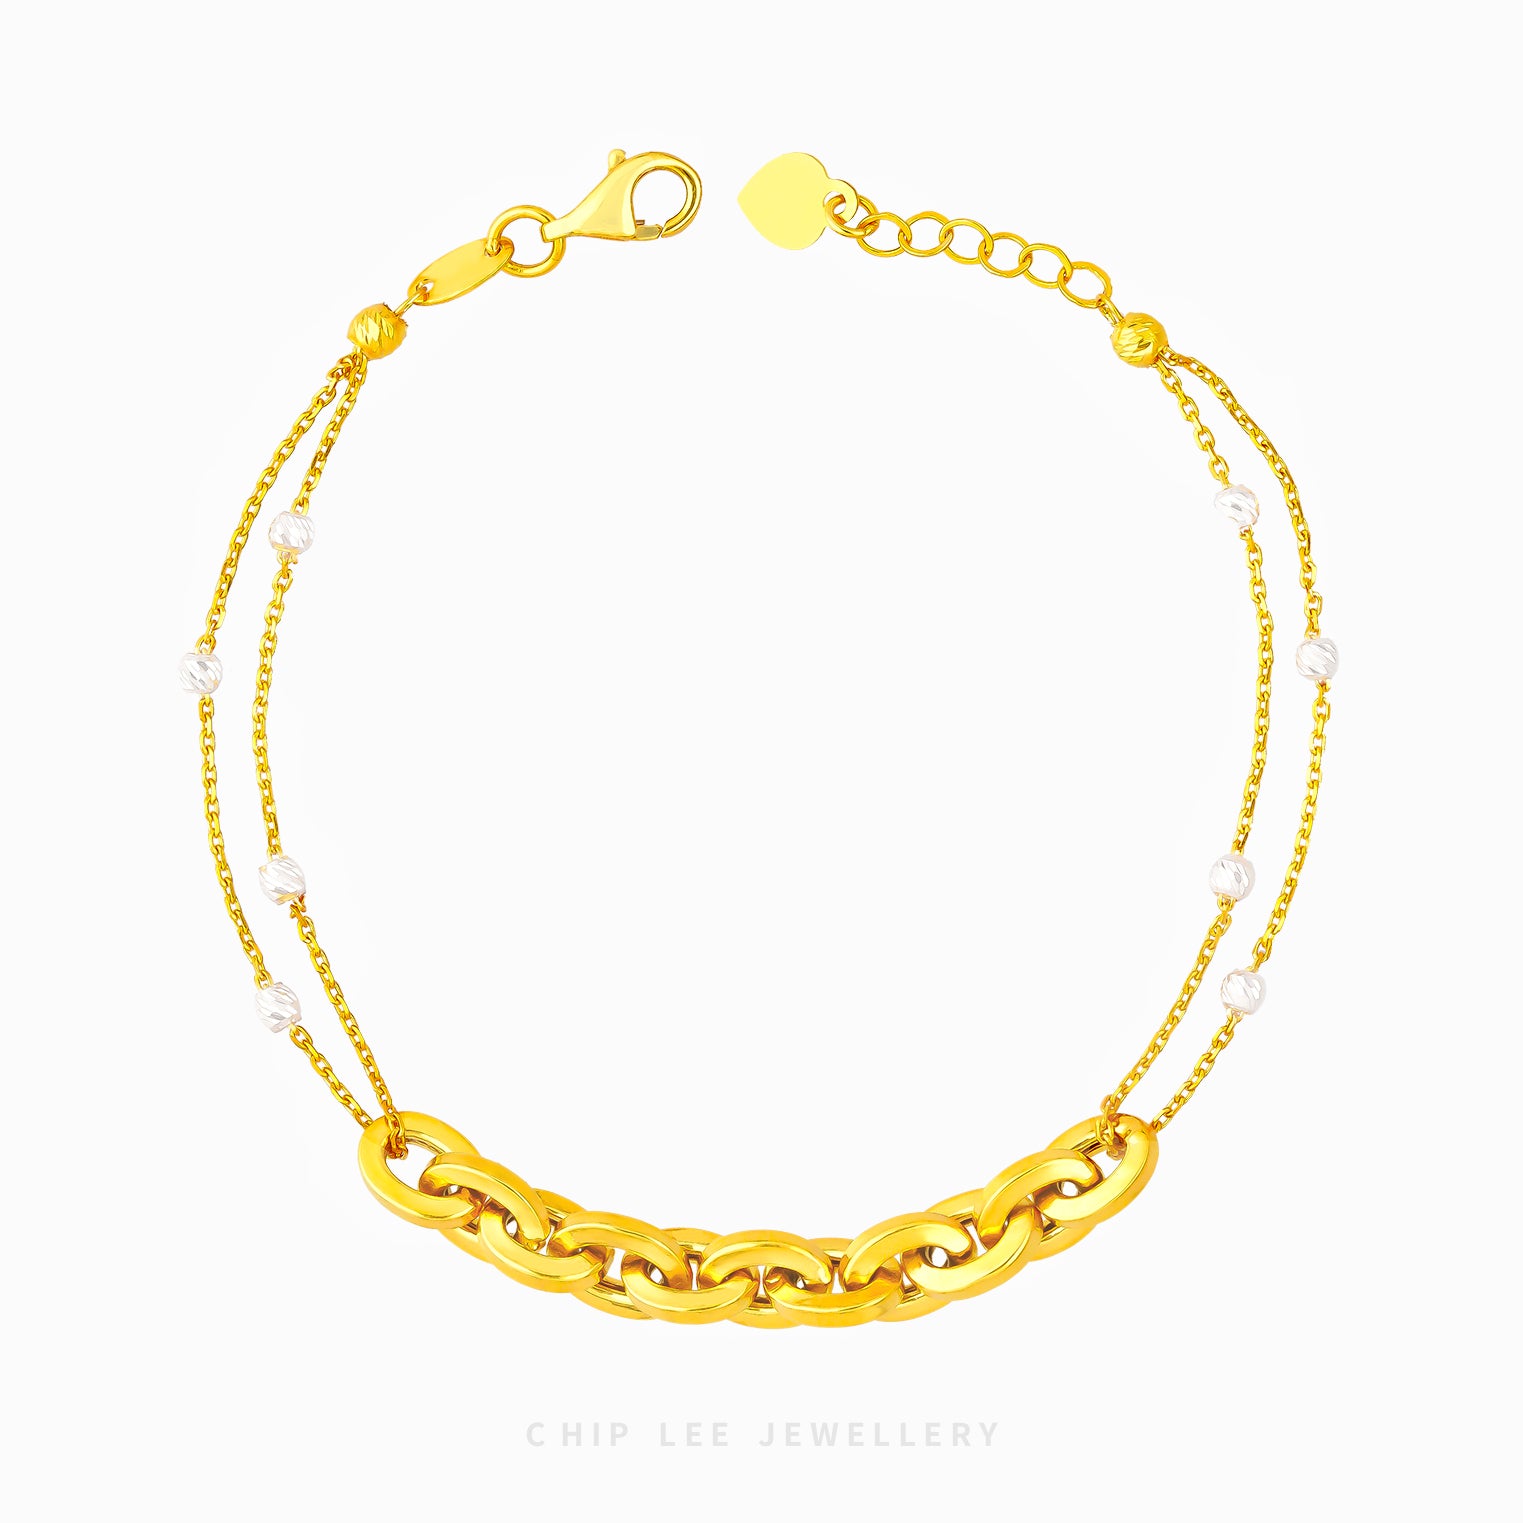 Duo Tone Mixed Chain Bracelet - Chip Lee Jewellery